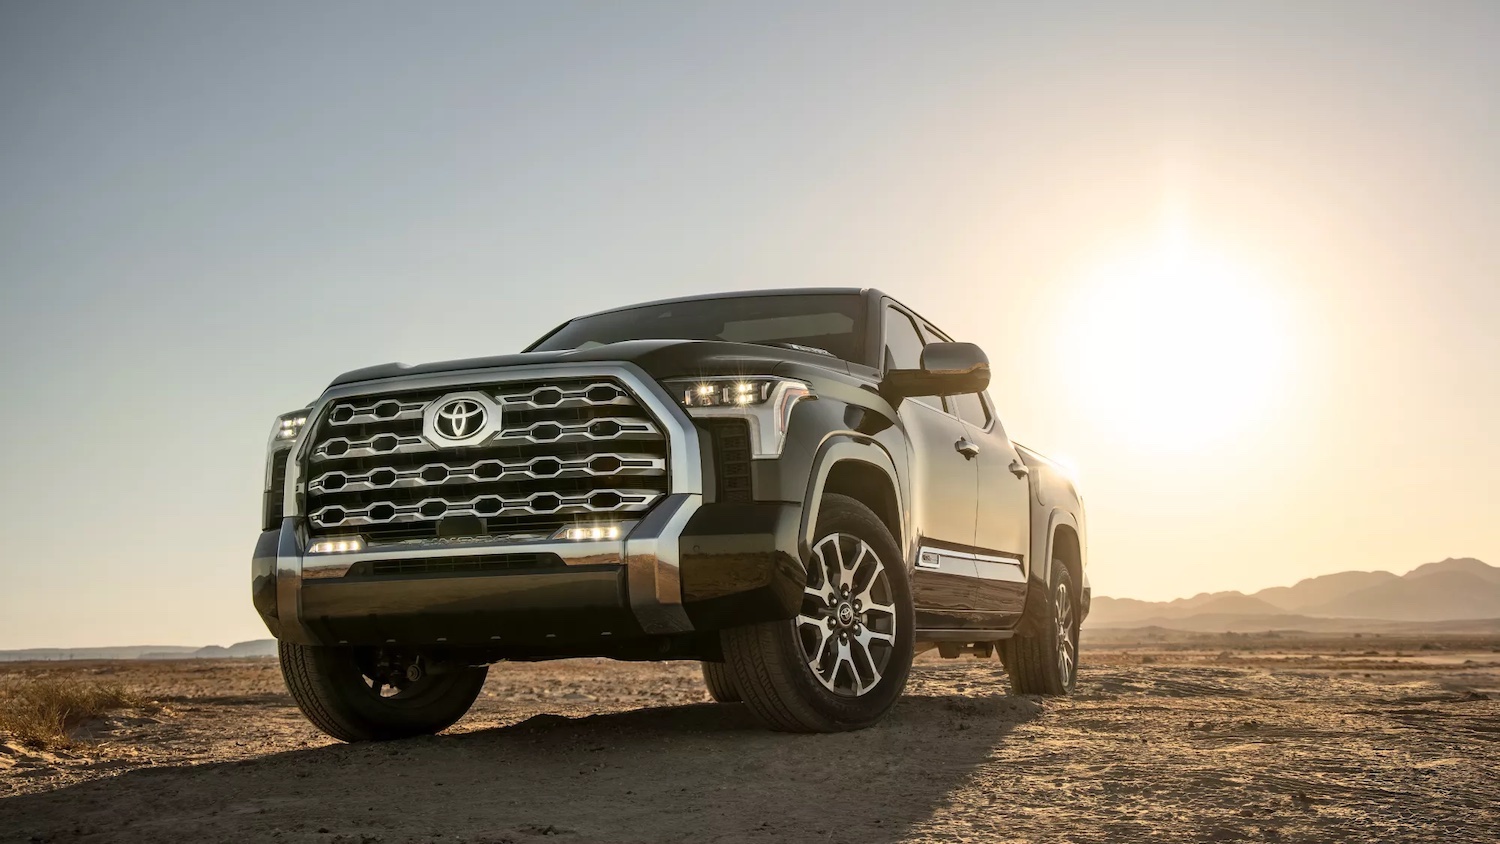 Promo shot of a 2022 Toyota Tundra pickup truck parked in a desert.